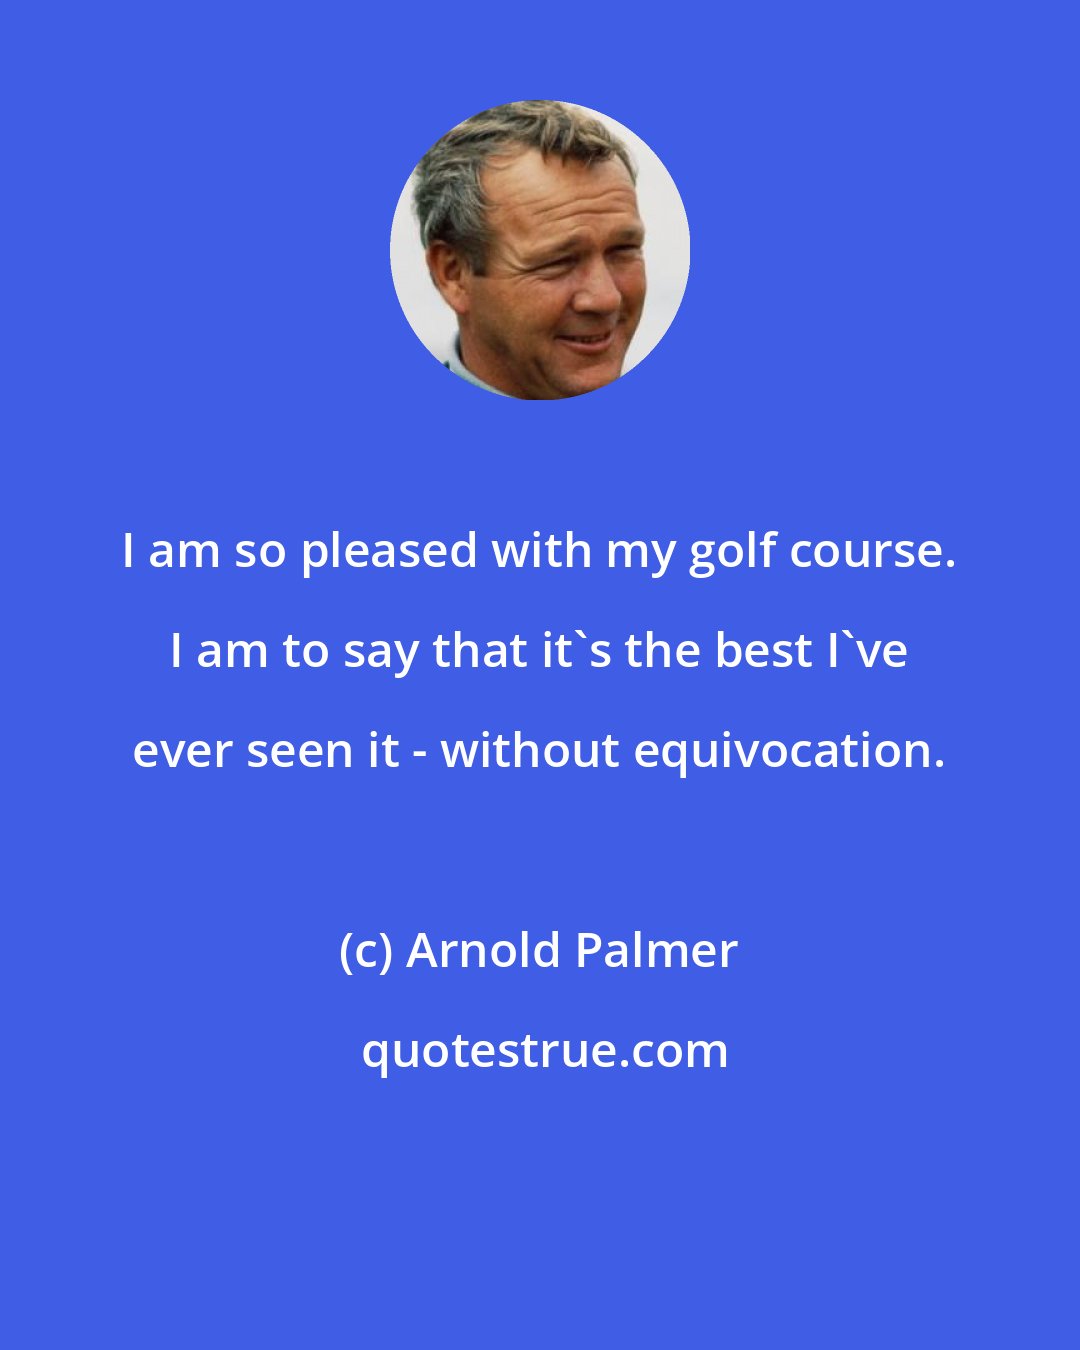 Arnold Palmer: I am so pleased with my golf course. I am to say that it's the best I've ever seen it - without equivocation.